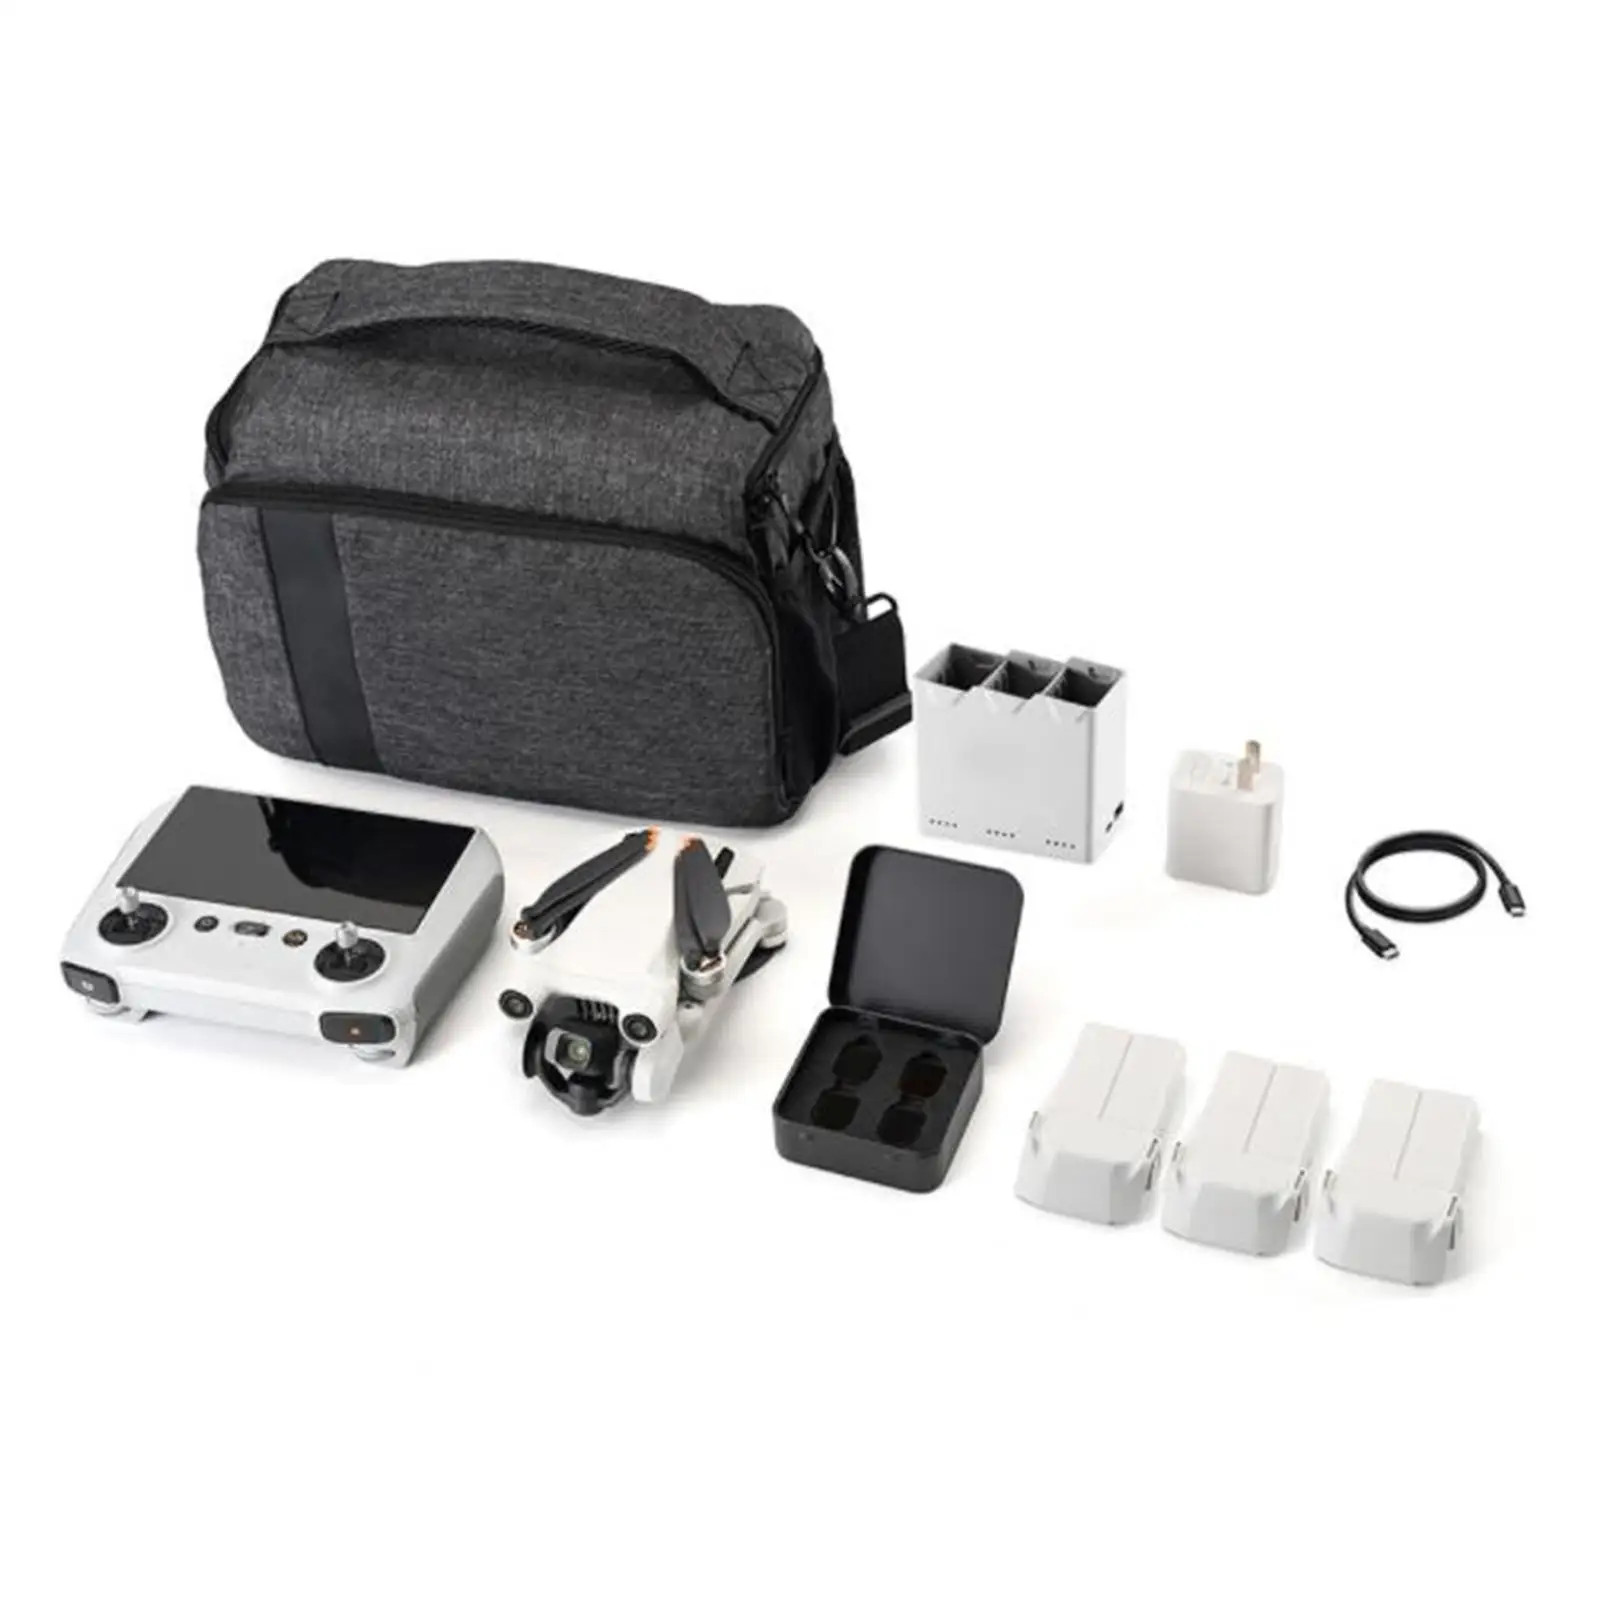 Drone Carrying Case Remote Control Bag Large Capacity Protective Cover Travel Bag Storage Bag for DJI Mini 3 Pro Protector Parts